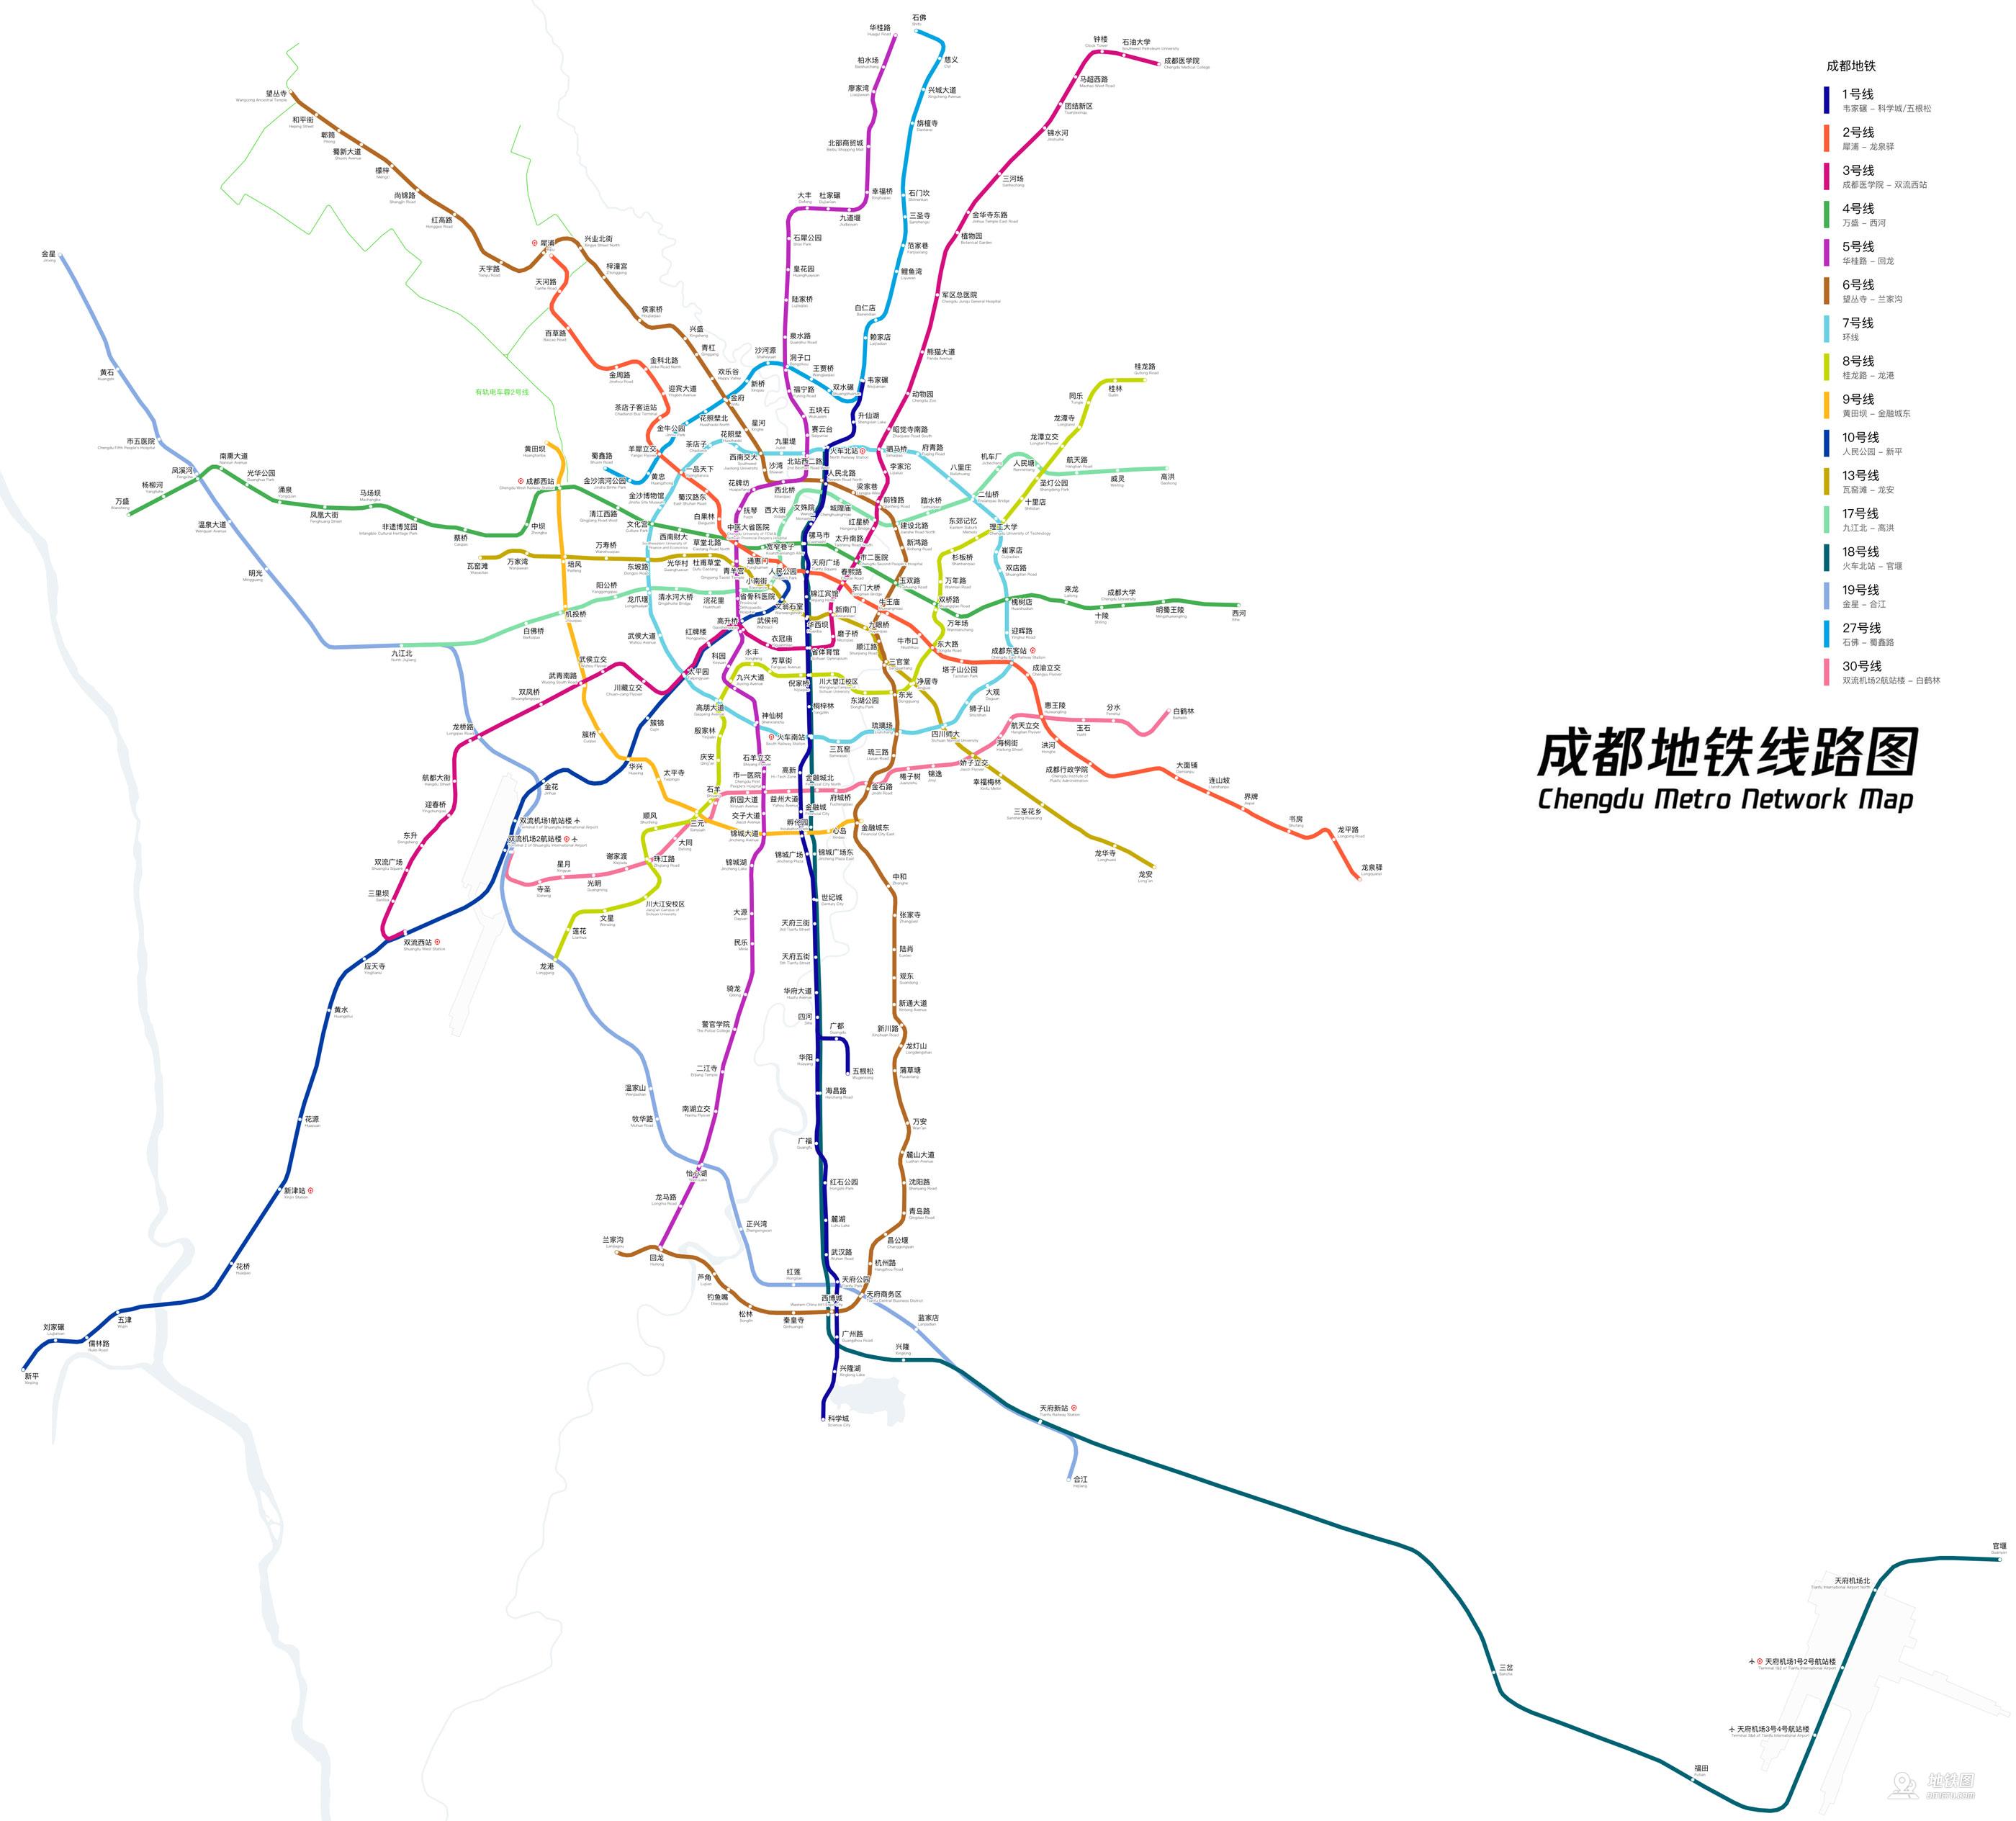 China’s Chengdu Metro opens five new lines in city